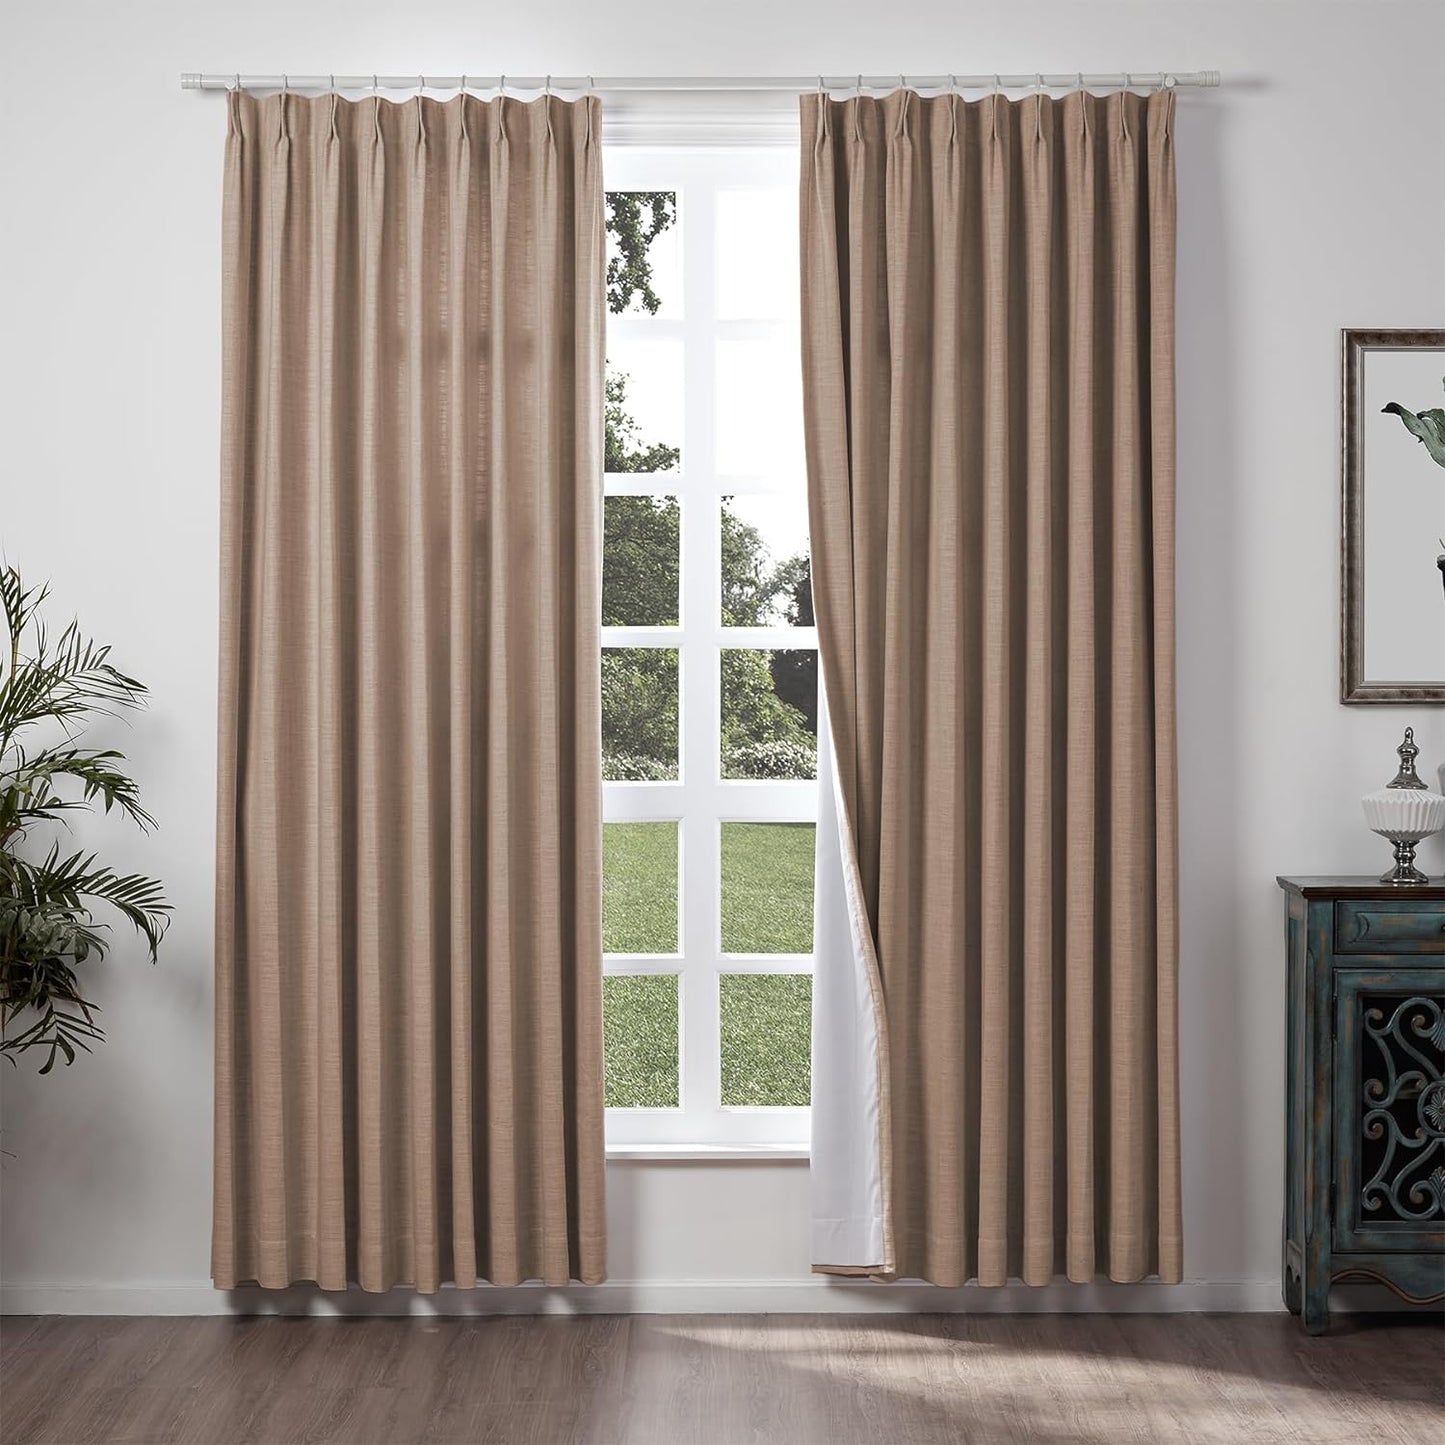 Chadmade 50" W X 63" L Polyester Linen Drape with Blackout Lining Pinch Pleat Curtain for Sliding Door Patio Door Living Room Bedroom, (1 Panel) Sand Beige Tallis Collection  ChadMade Rust Brown (9) 100Wx102L 